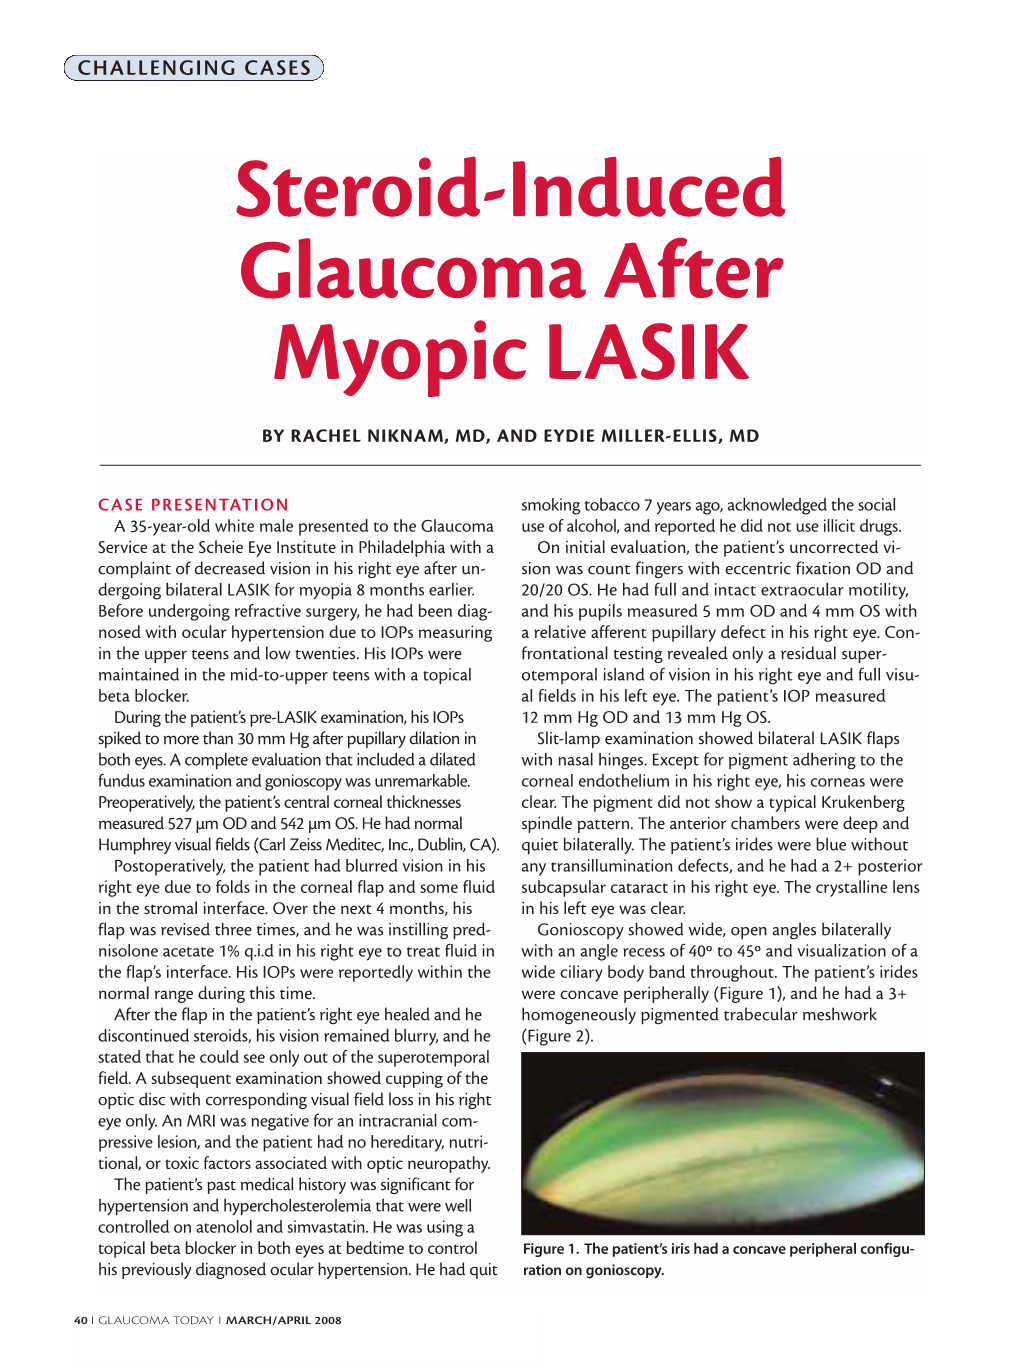 Steroid-Induced Glaucoma After Myopic LASIK